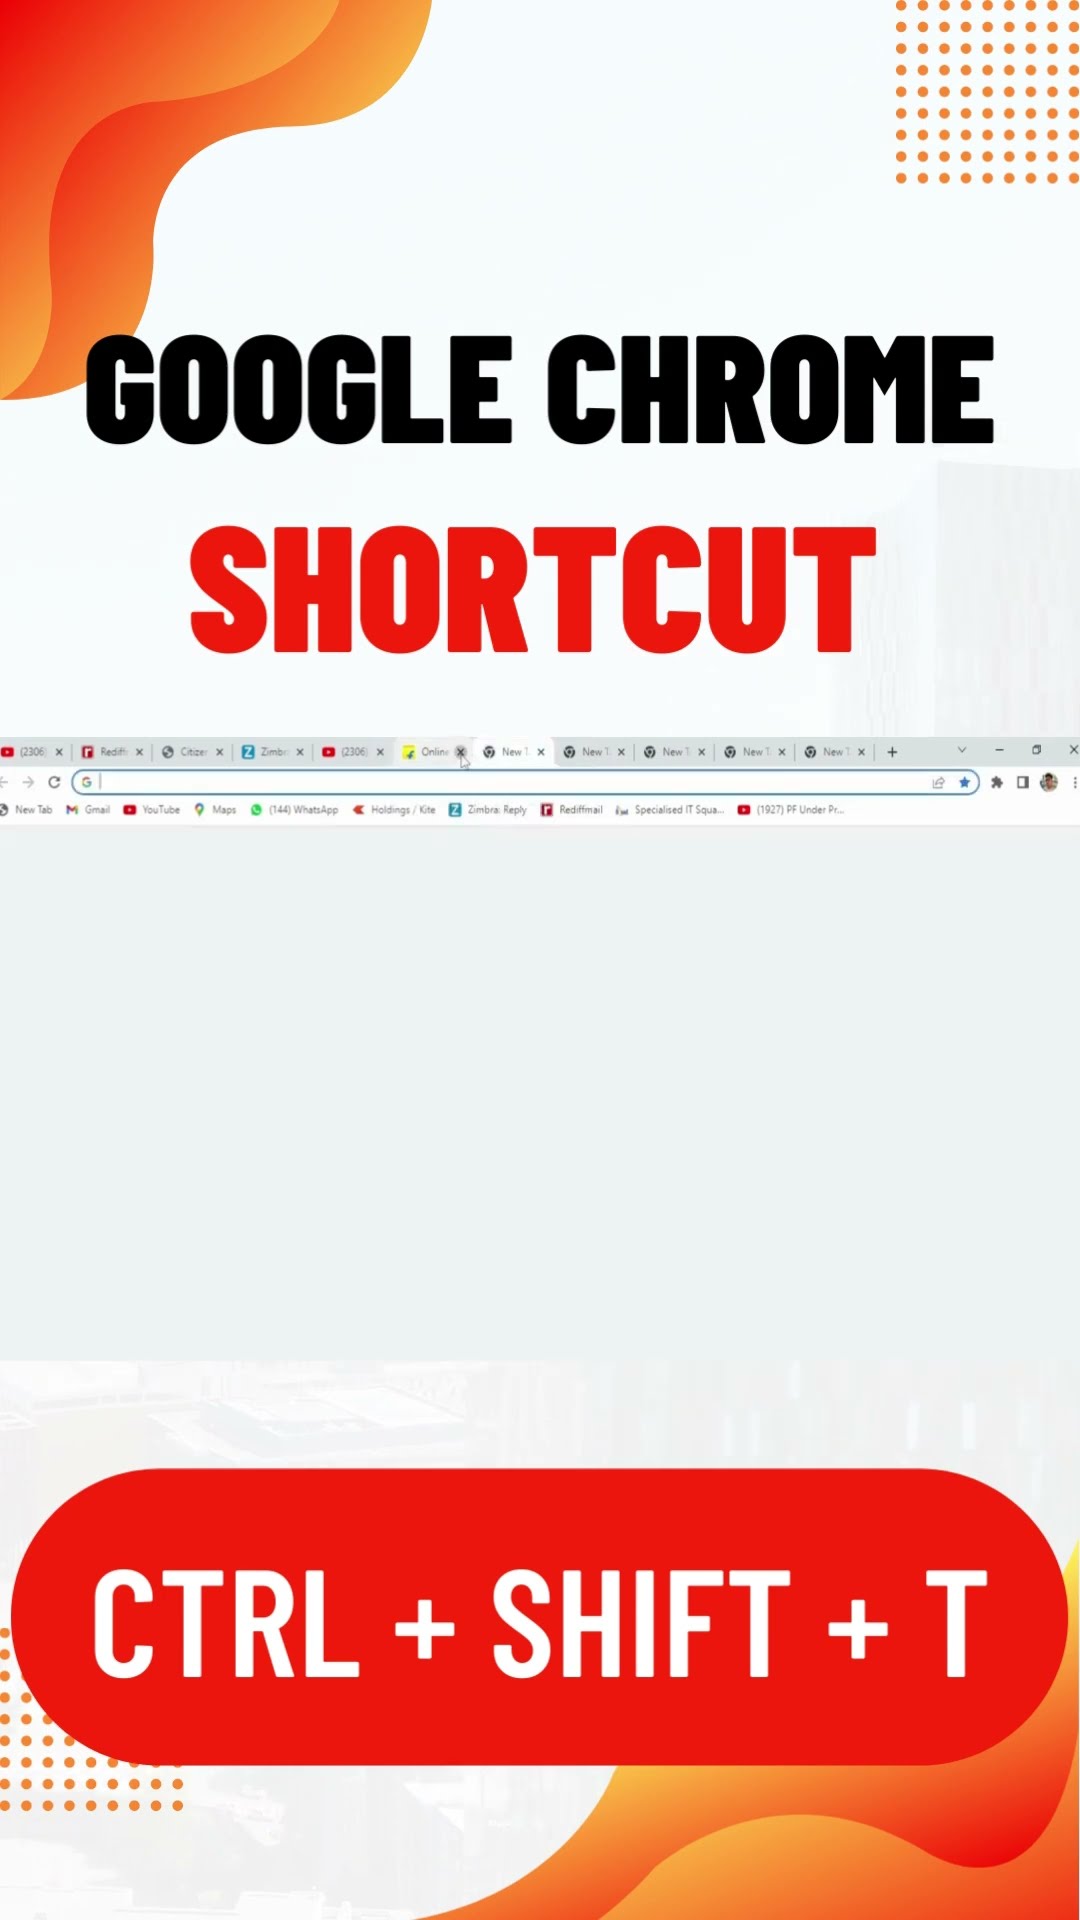 How to Restore Tab in Google Chrome Google Chrome Shortcuts 2023 #shortvideo #shortcut